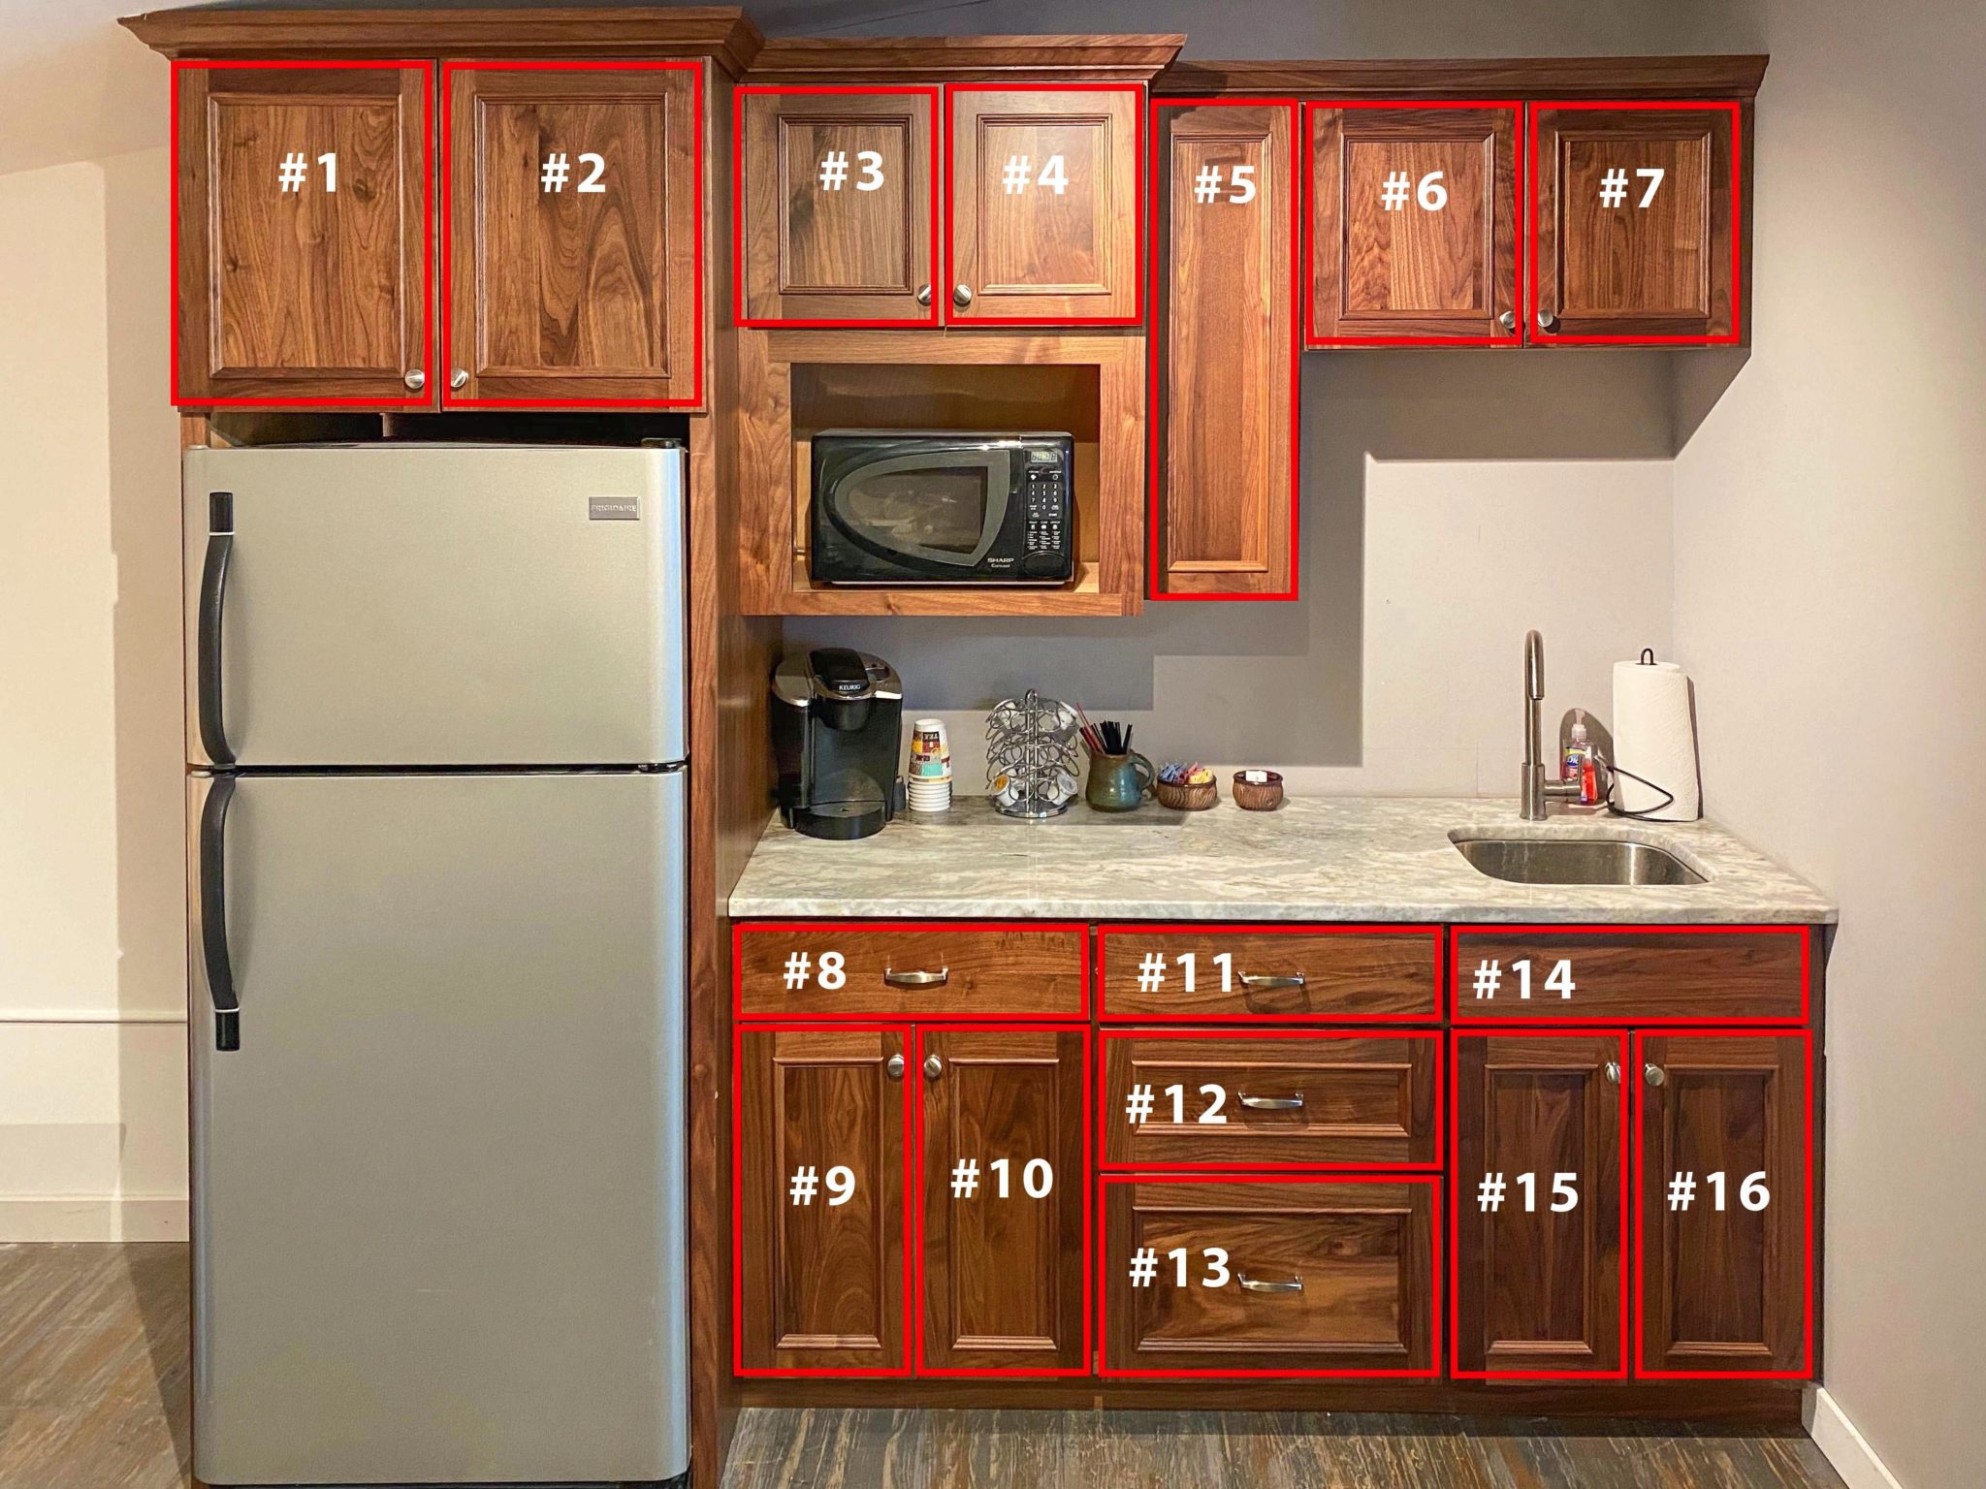 Measuring for Your New Cabinet Doors - Cabinet Joint - can you replace cabinet doors?